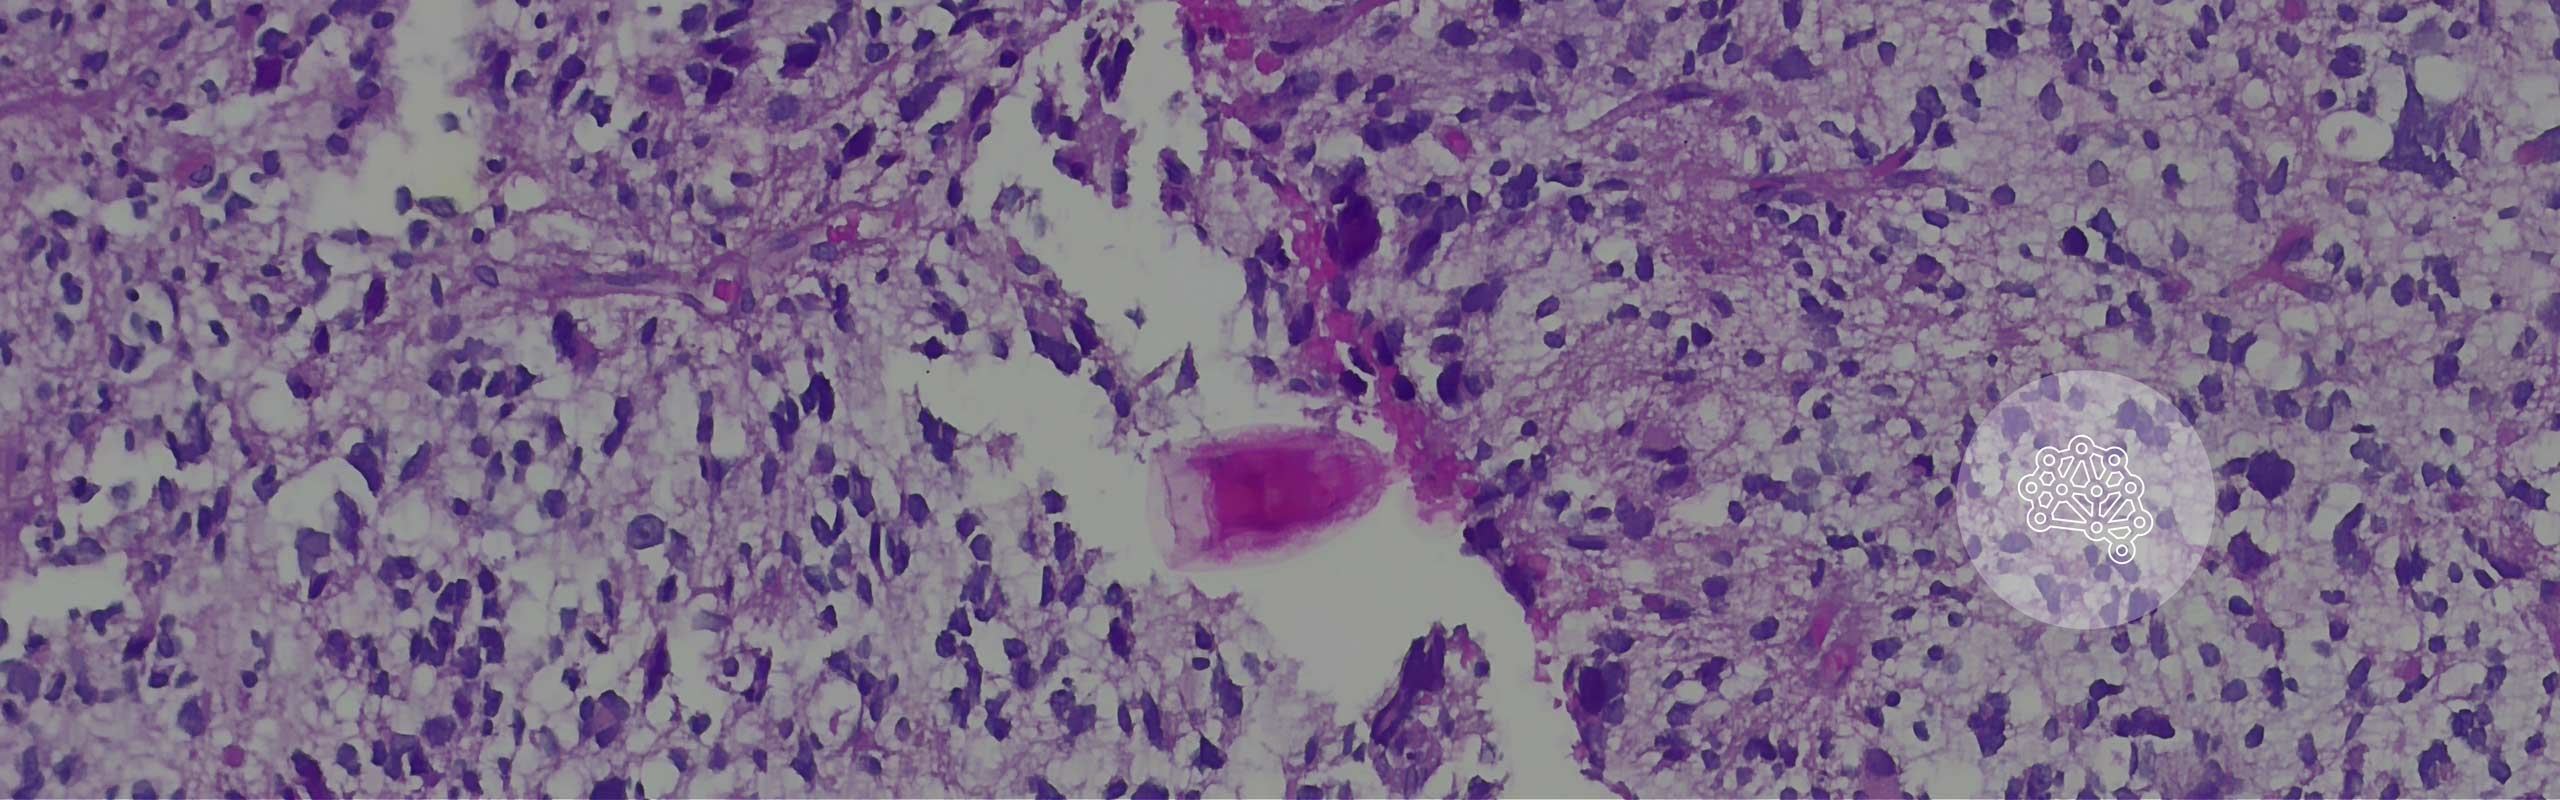 About Us - Neuropathology: O'Donnell Brain Instititute - Top Banner